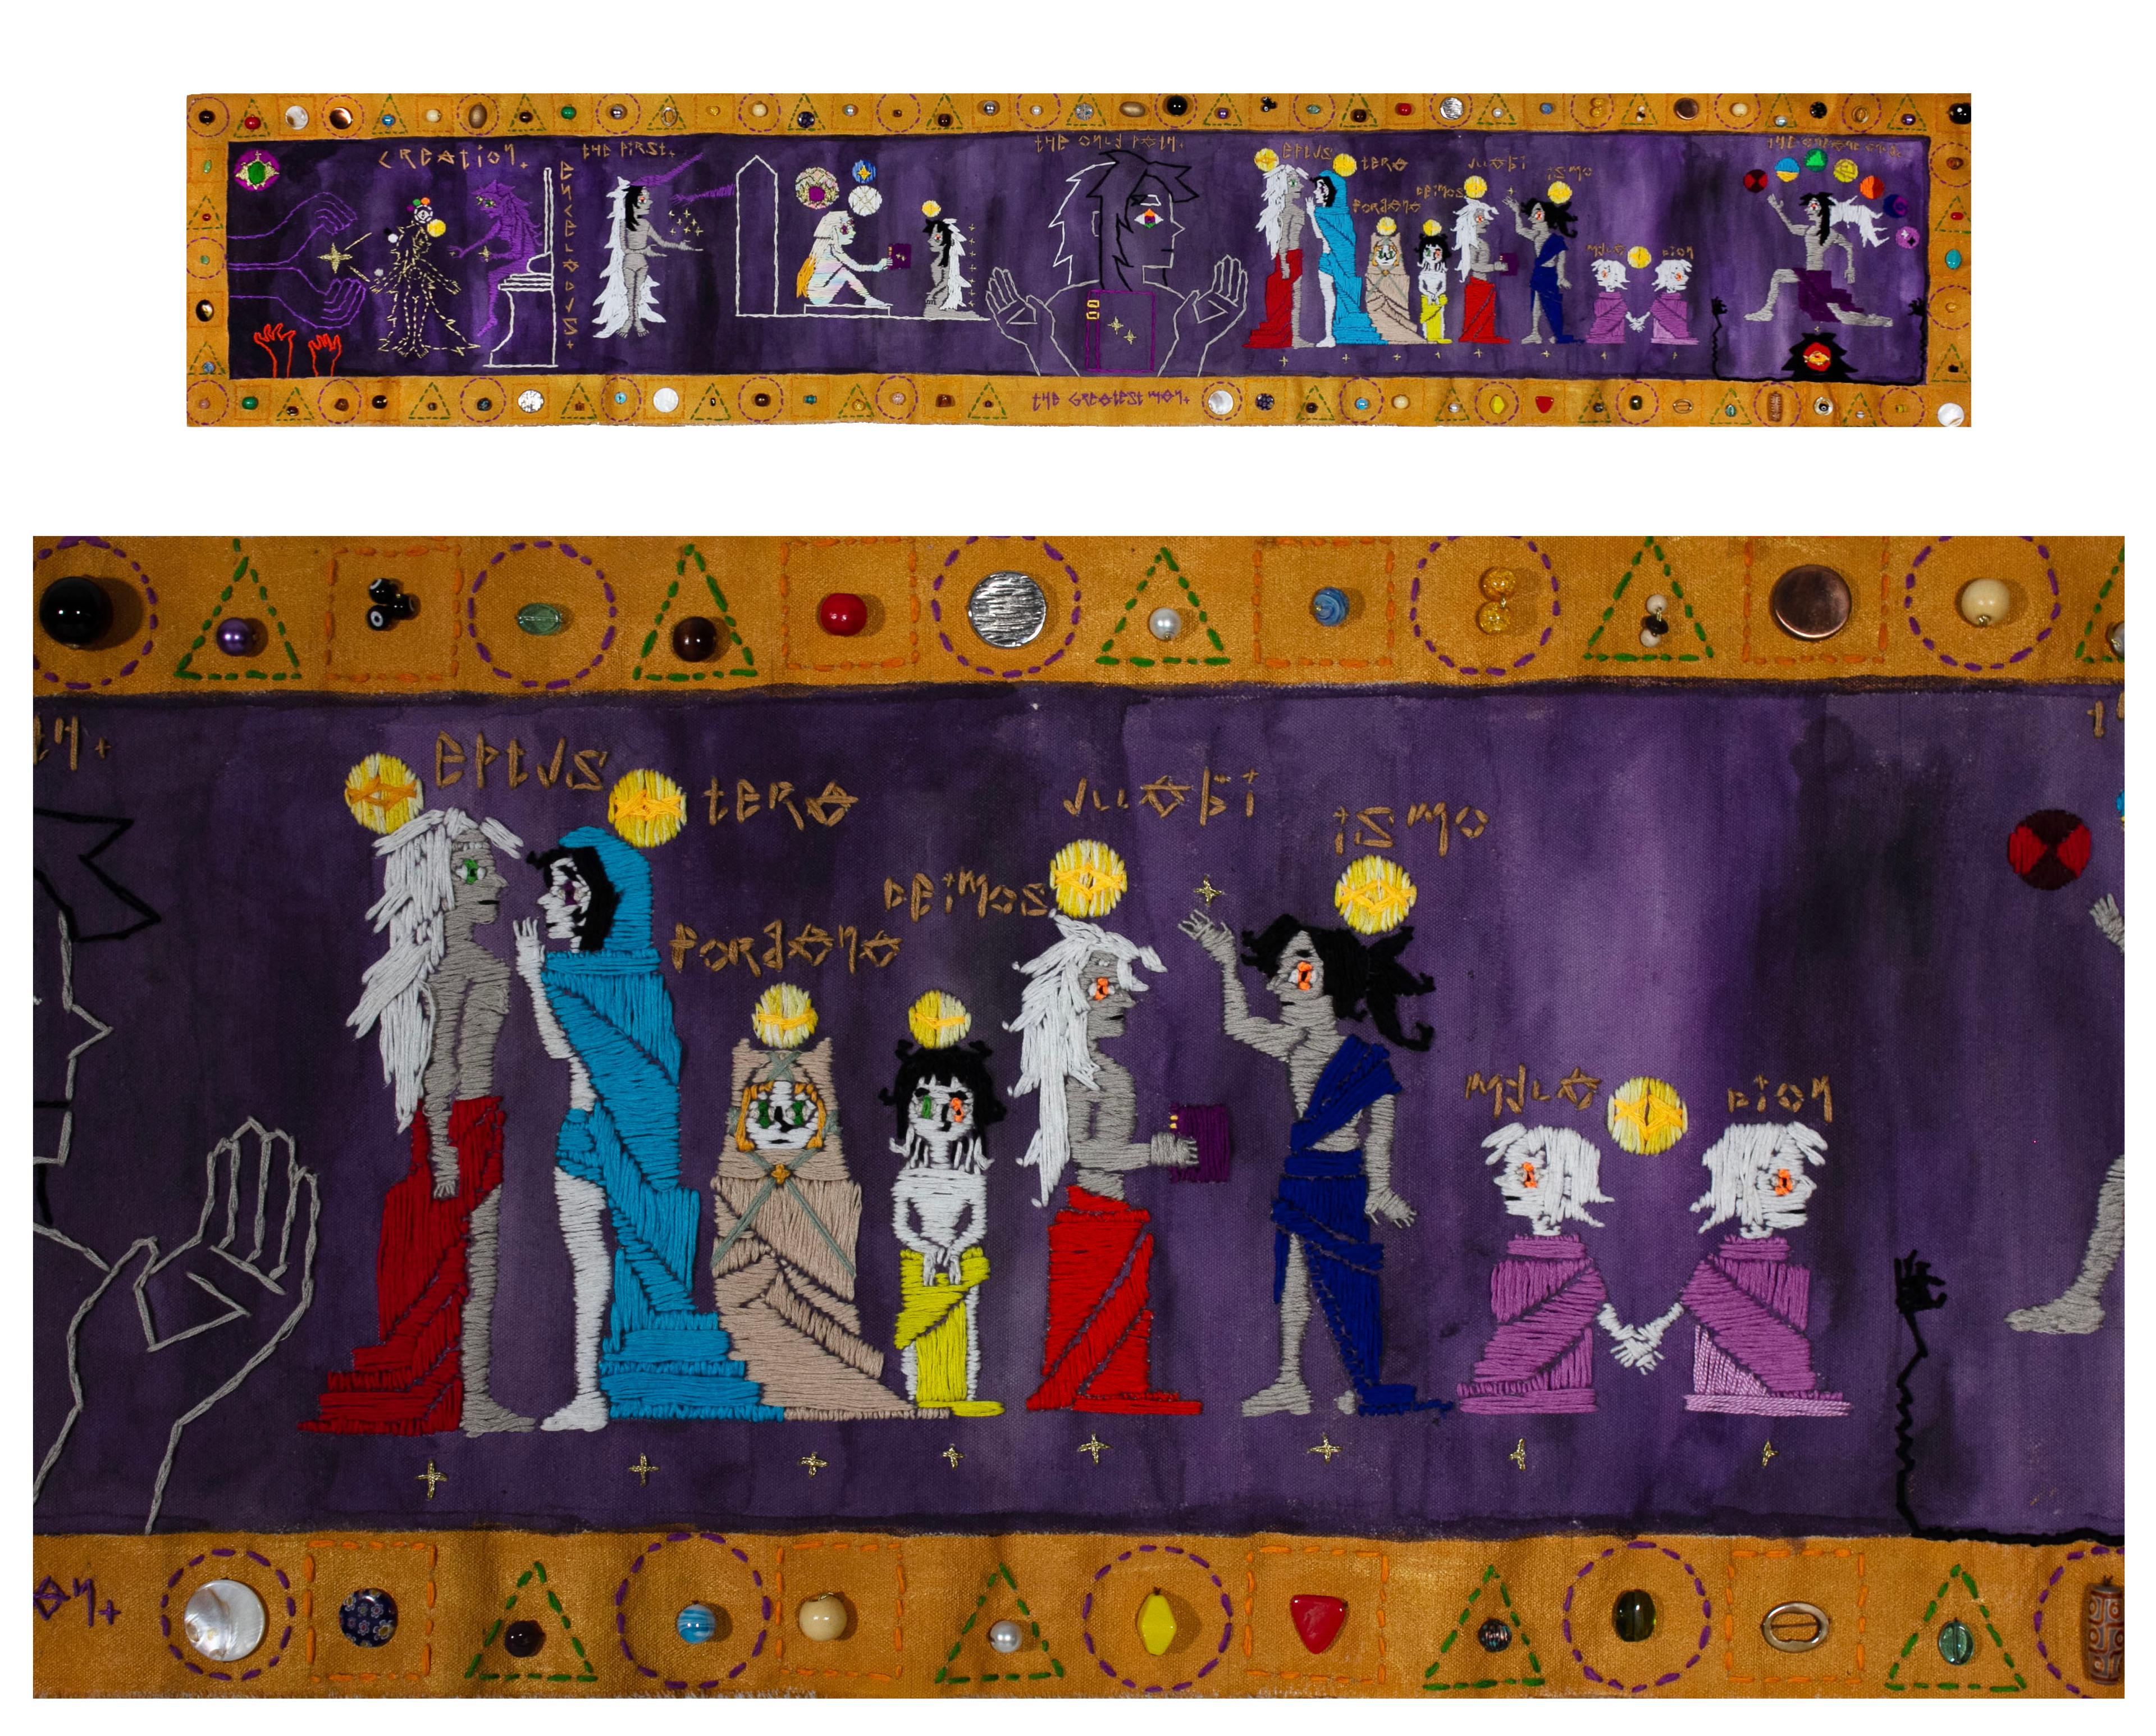 Embroidered tapestry describing the life of Enceladus. The tapestry is extremely long and narrow, enclosed in a gold-colored frame that is adorned with colorful baubles affixed inside dashed outlines of squares, circles, and triangles, allsewn in various colors of thread. The main tapestry is sewn on a purple background. At far left, a pair of large, opened purple hands emit a yellow star, with a pair of red clawed hands reaching up from below. To the right, a long- haired figure outlined in yellow stands before a seated long- haired purple figure who sits on a white throne. The word Creation is sewn above this scene. Further to the right, a standing long- haired white figure gestures toward two seated white figures, one of whom hands a book to the other. This scene is titled The First. Next, the center of the tapestry shows a long-haired male from the chest up, hands extended, his face turned to the right. A book floats in front of his chest. This scene is titled The Greatest Man. The right half of the tapestry shows several figures, male and female, some adults, others children, each with woven name captions over their heads. At far right, the tapestry concludes with a gray long-haired figure in a purple robe kneeling and facing left with seven colored circles floating overhead, and an eighth red circle floating beneath the feet.